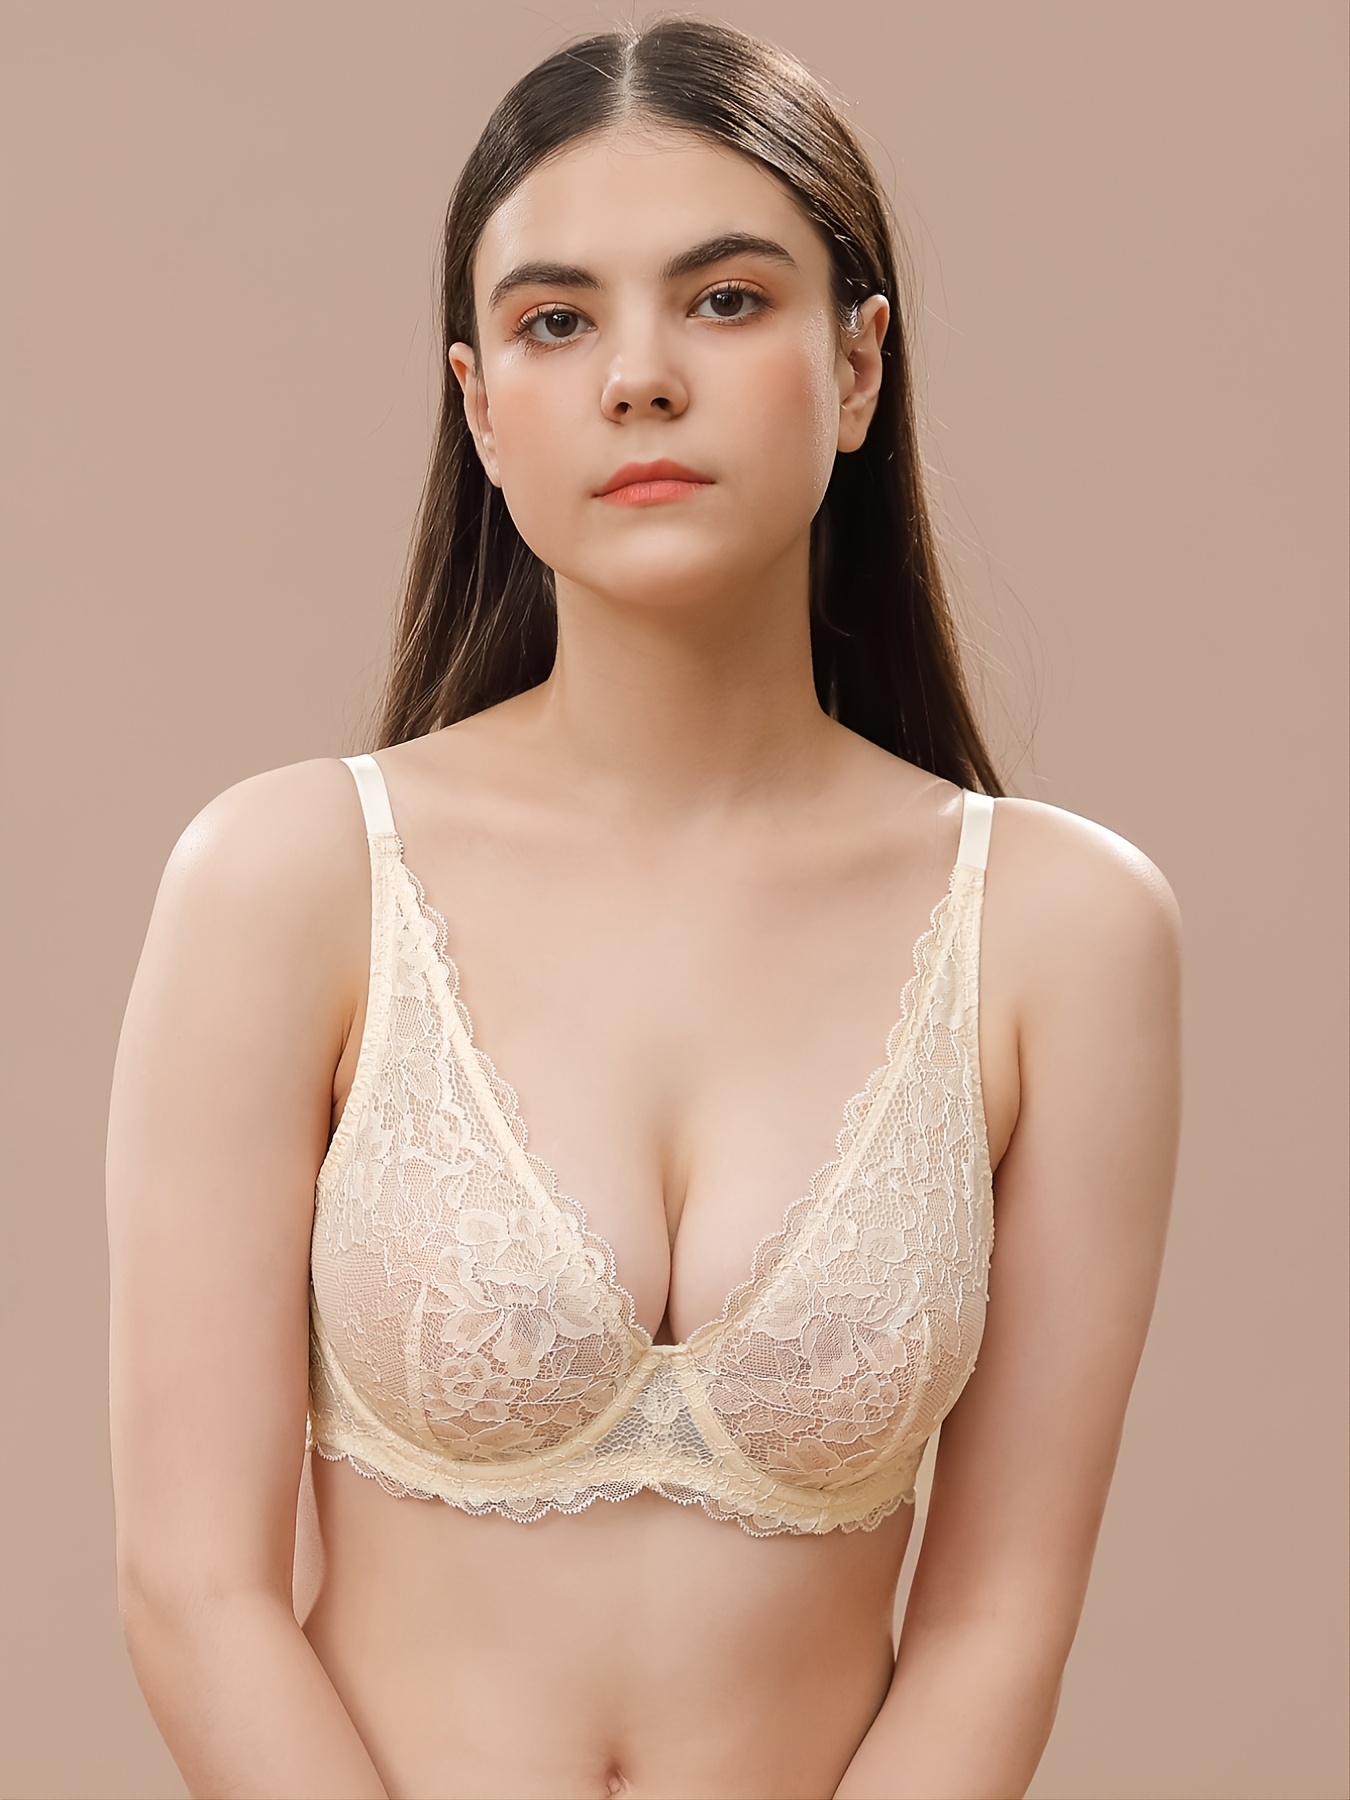 Valentines Gifts Mesh Hollow Bra Sheer Sexy Unlined Underwire Plunge  Embroidered Bra Womens Lingerie Underwear, Don't Miss These Great Deals